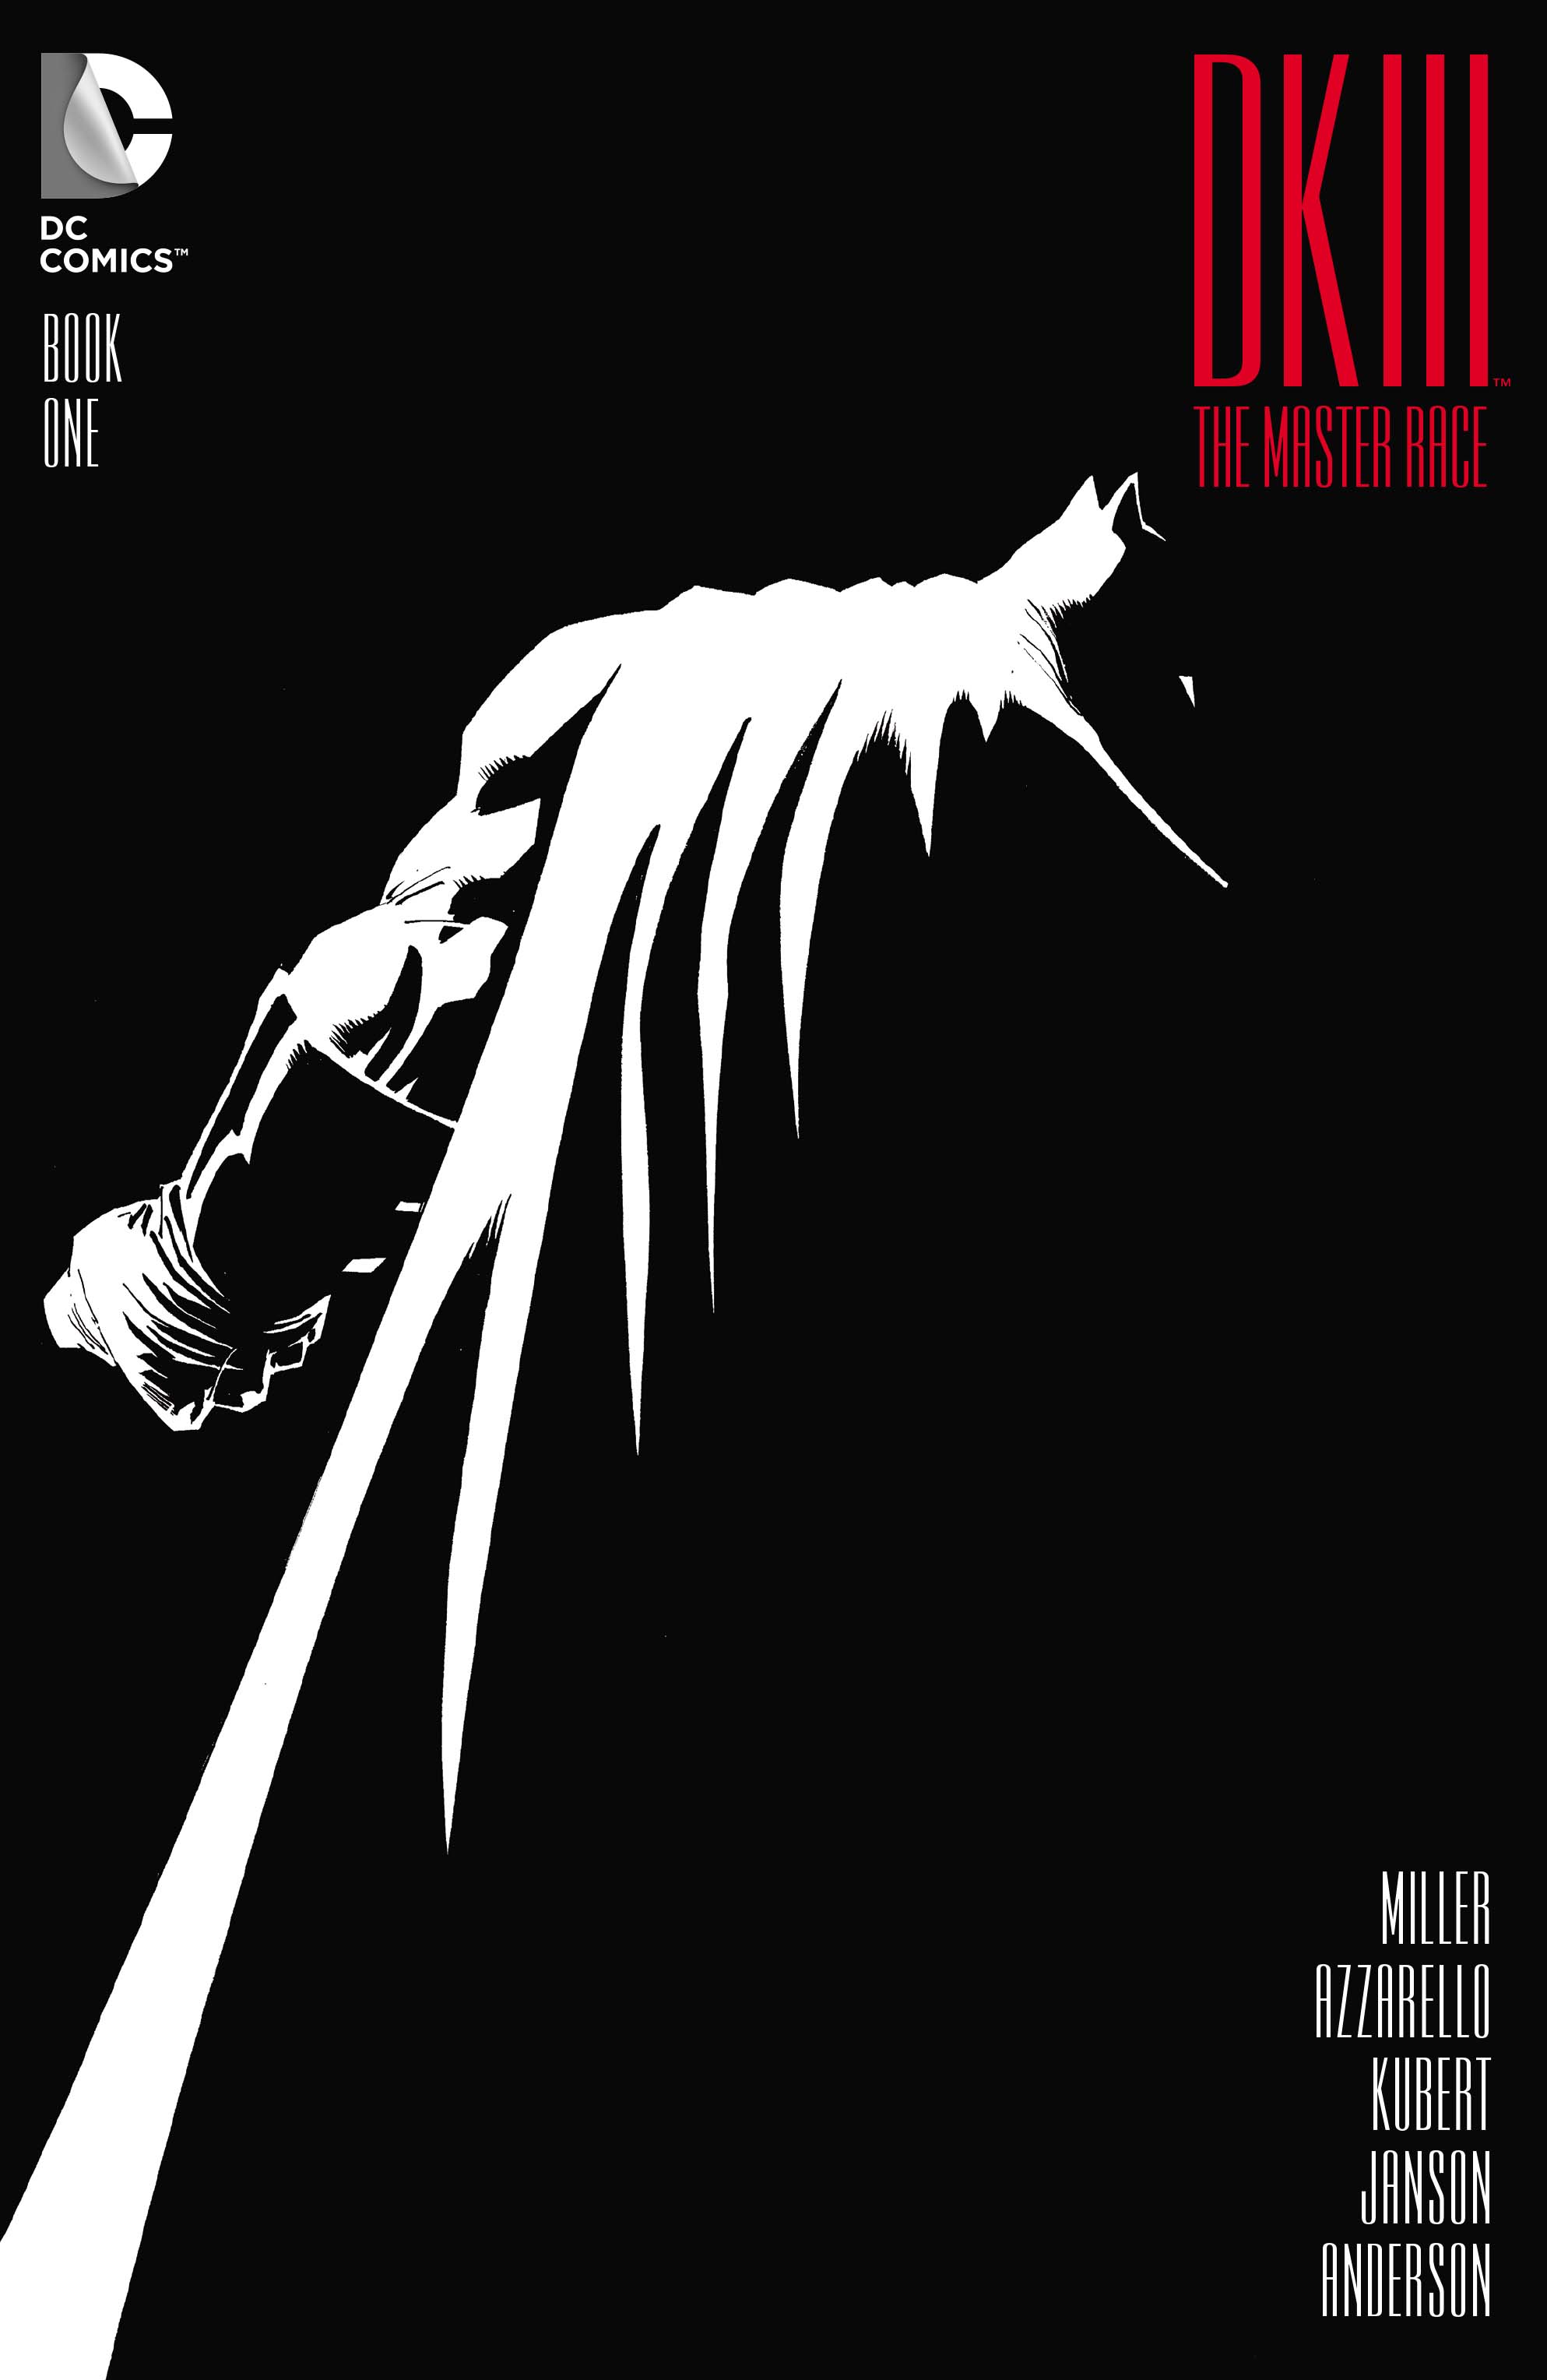 The Dark Knight III - The Master Race - Cover 1